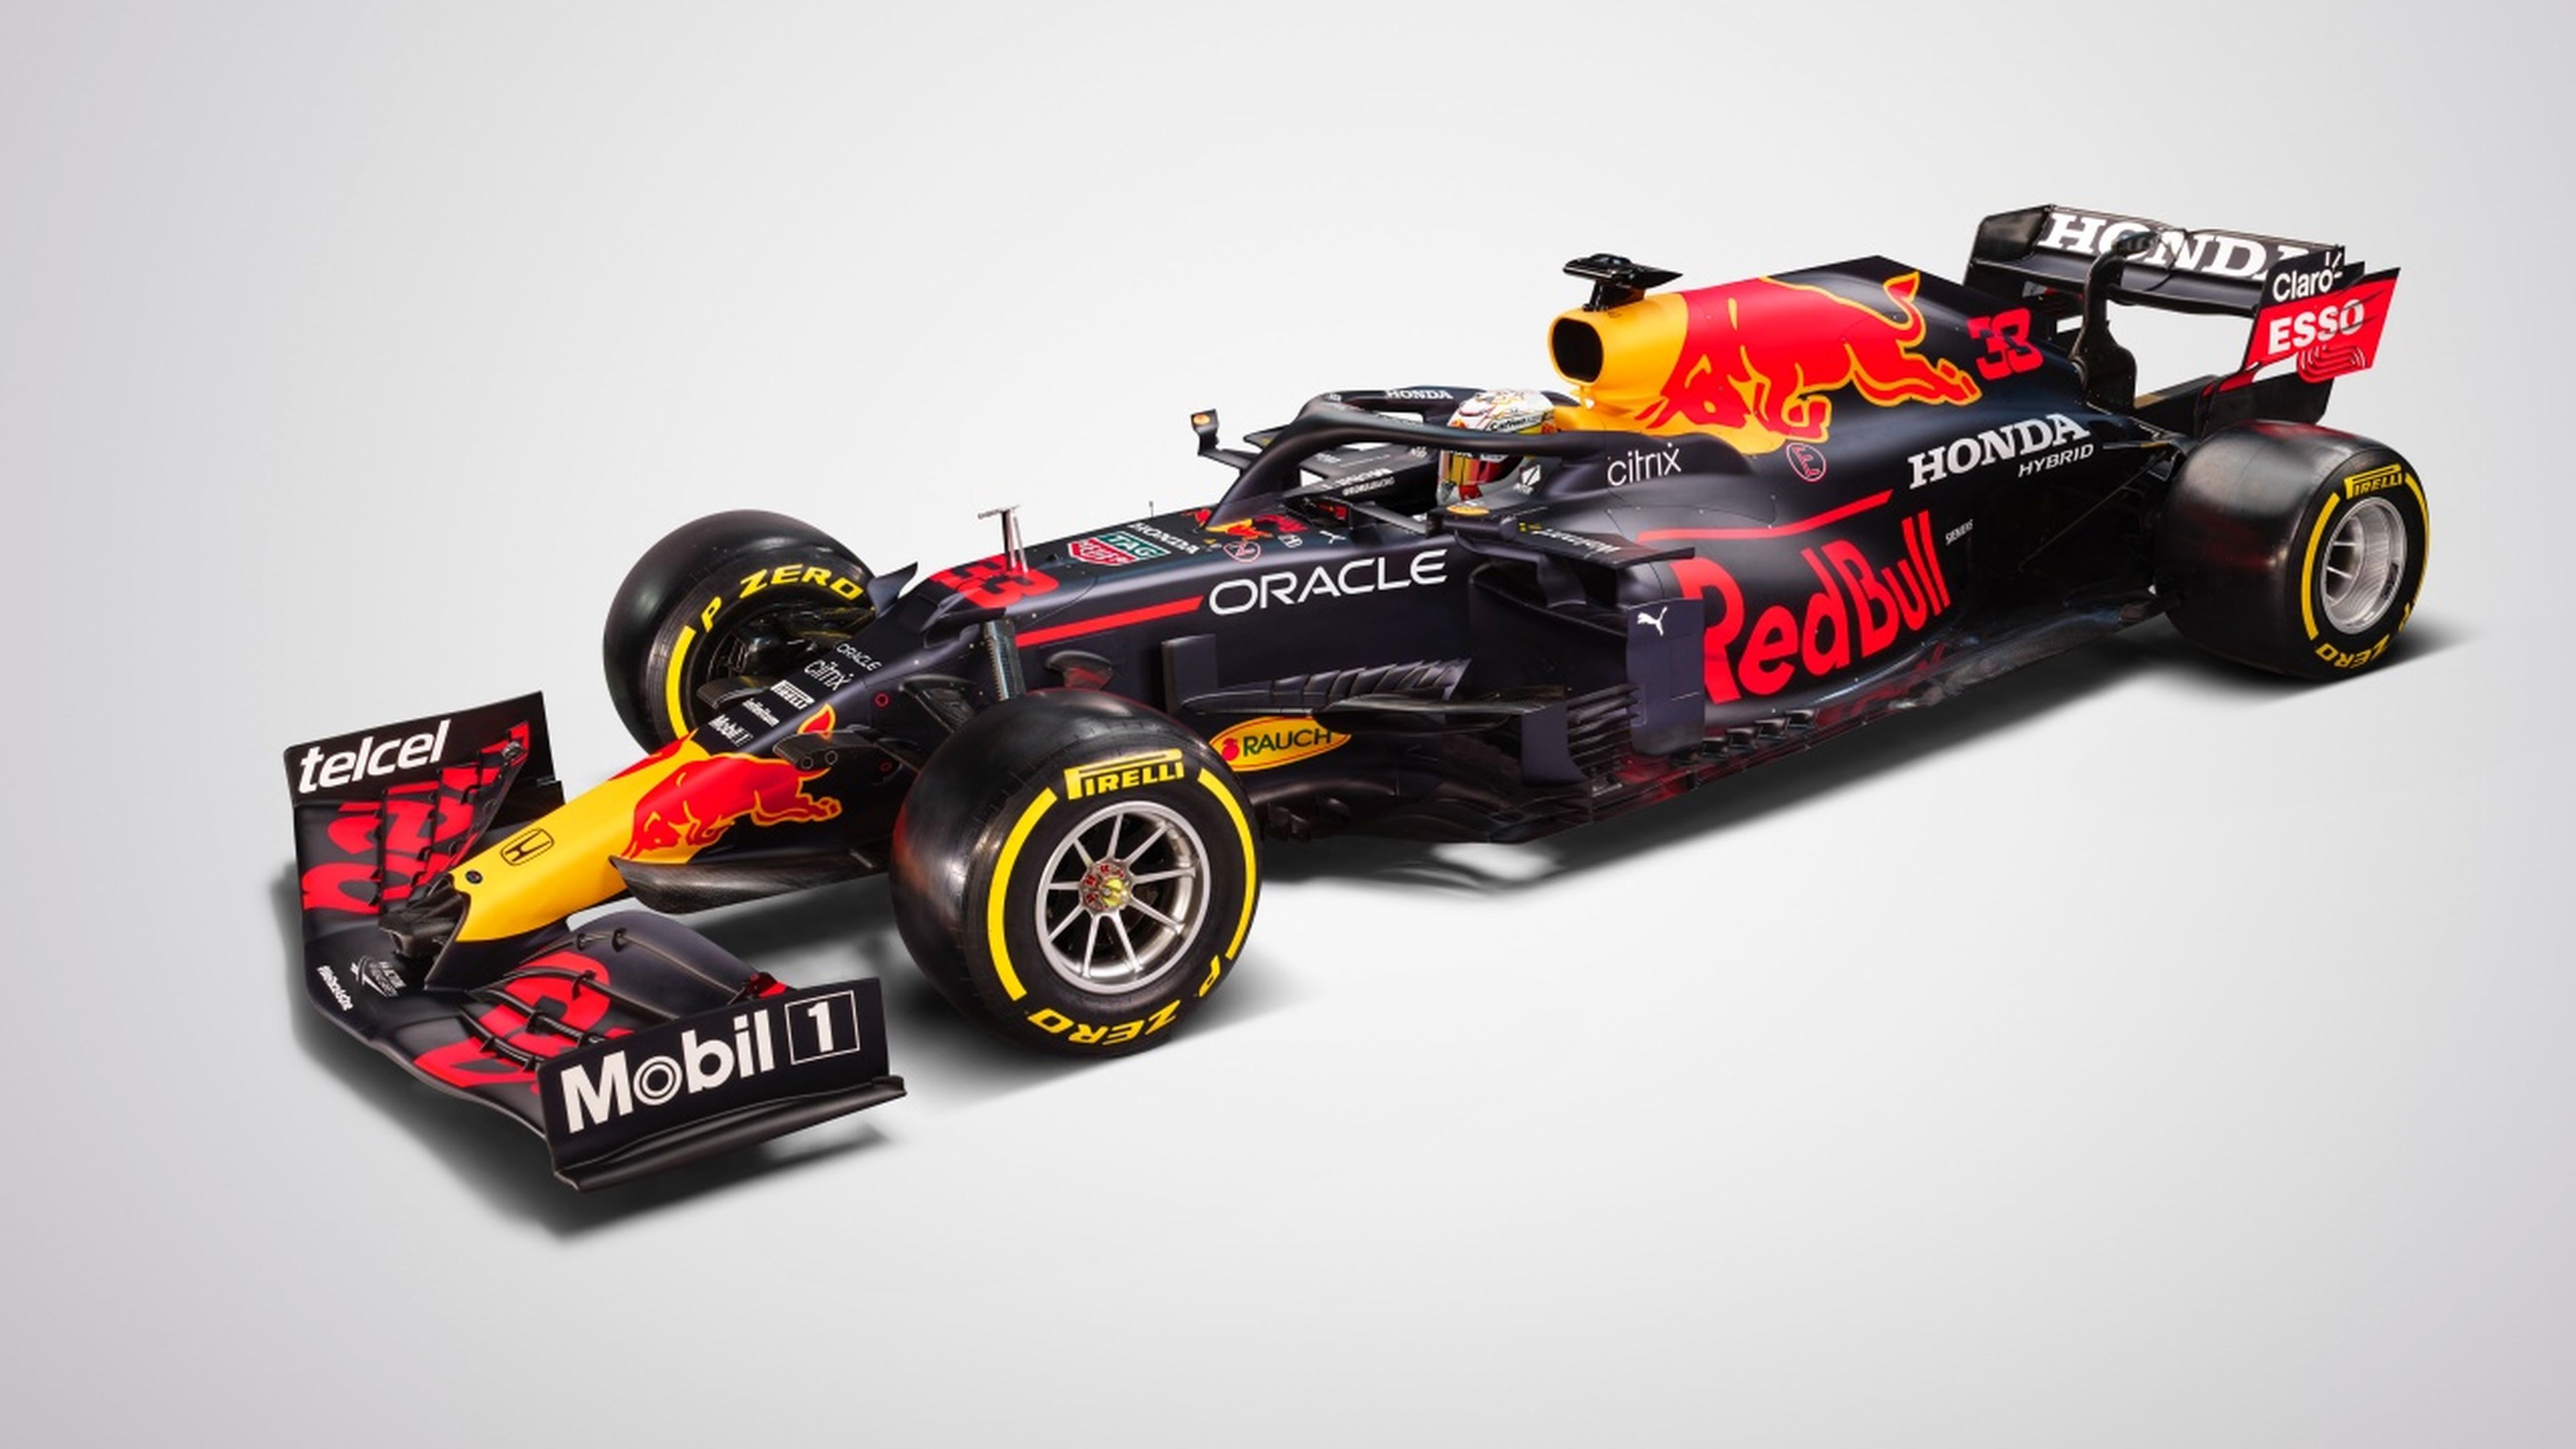 Red Bull Oracle